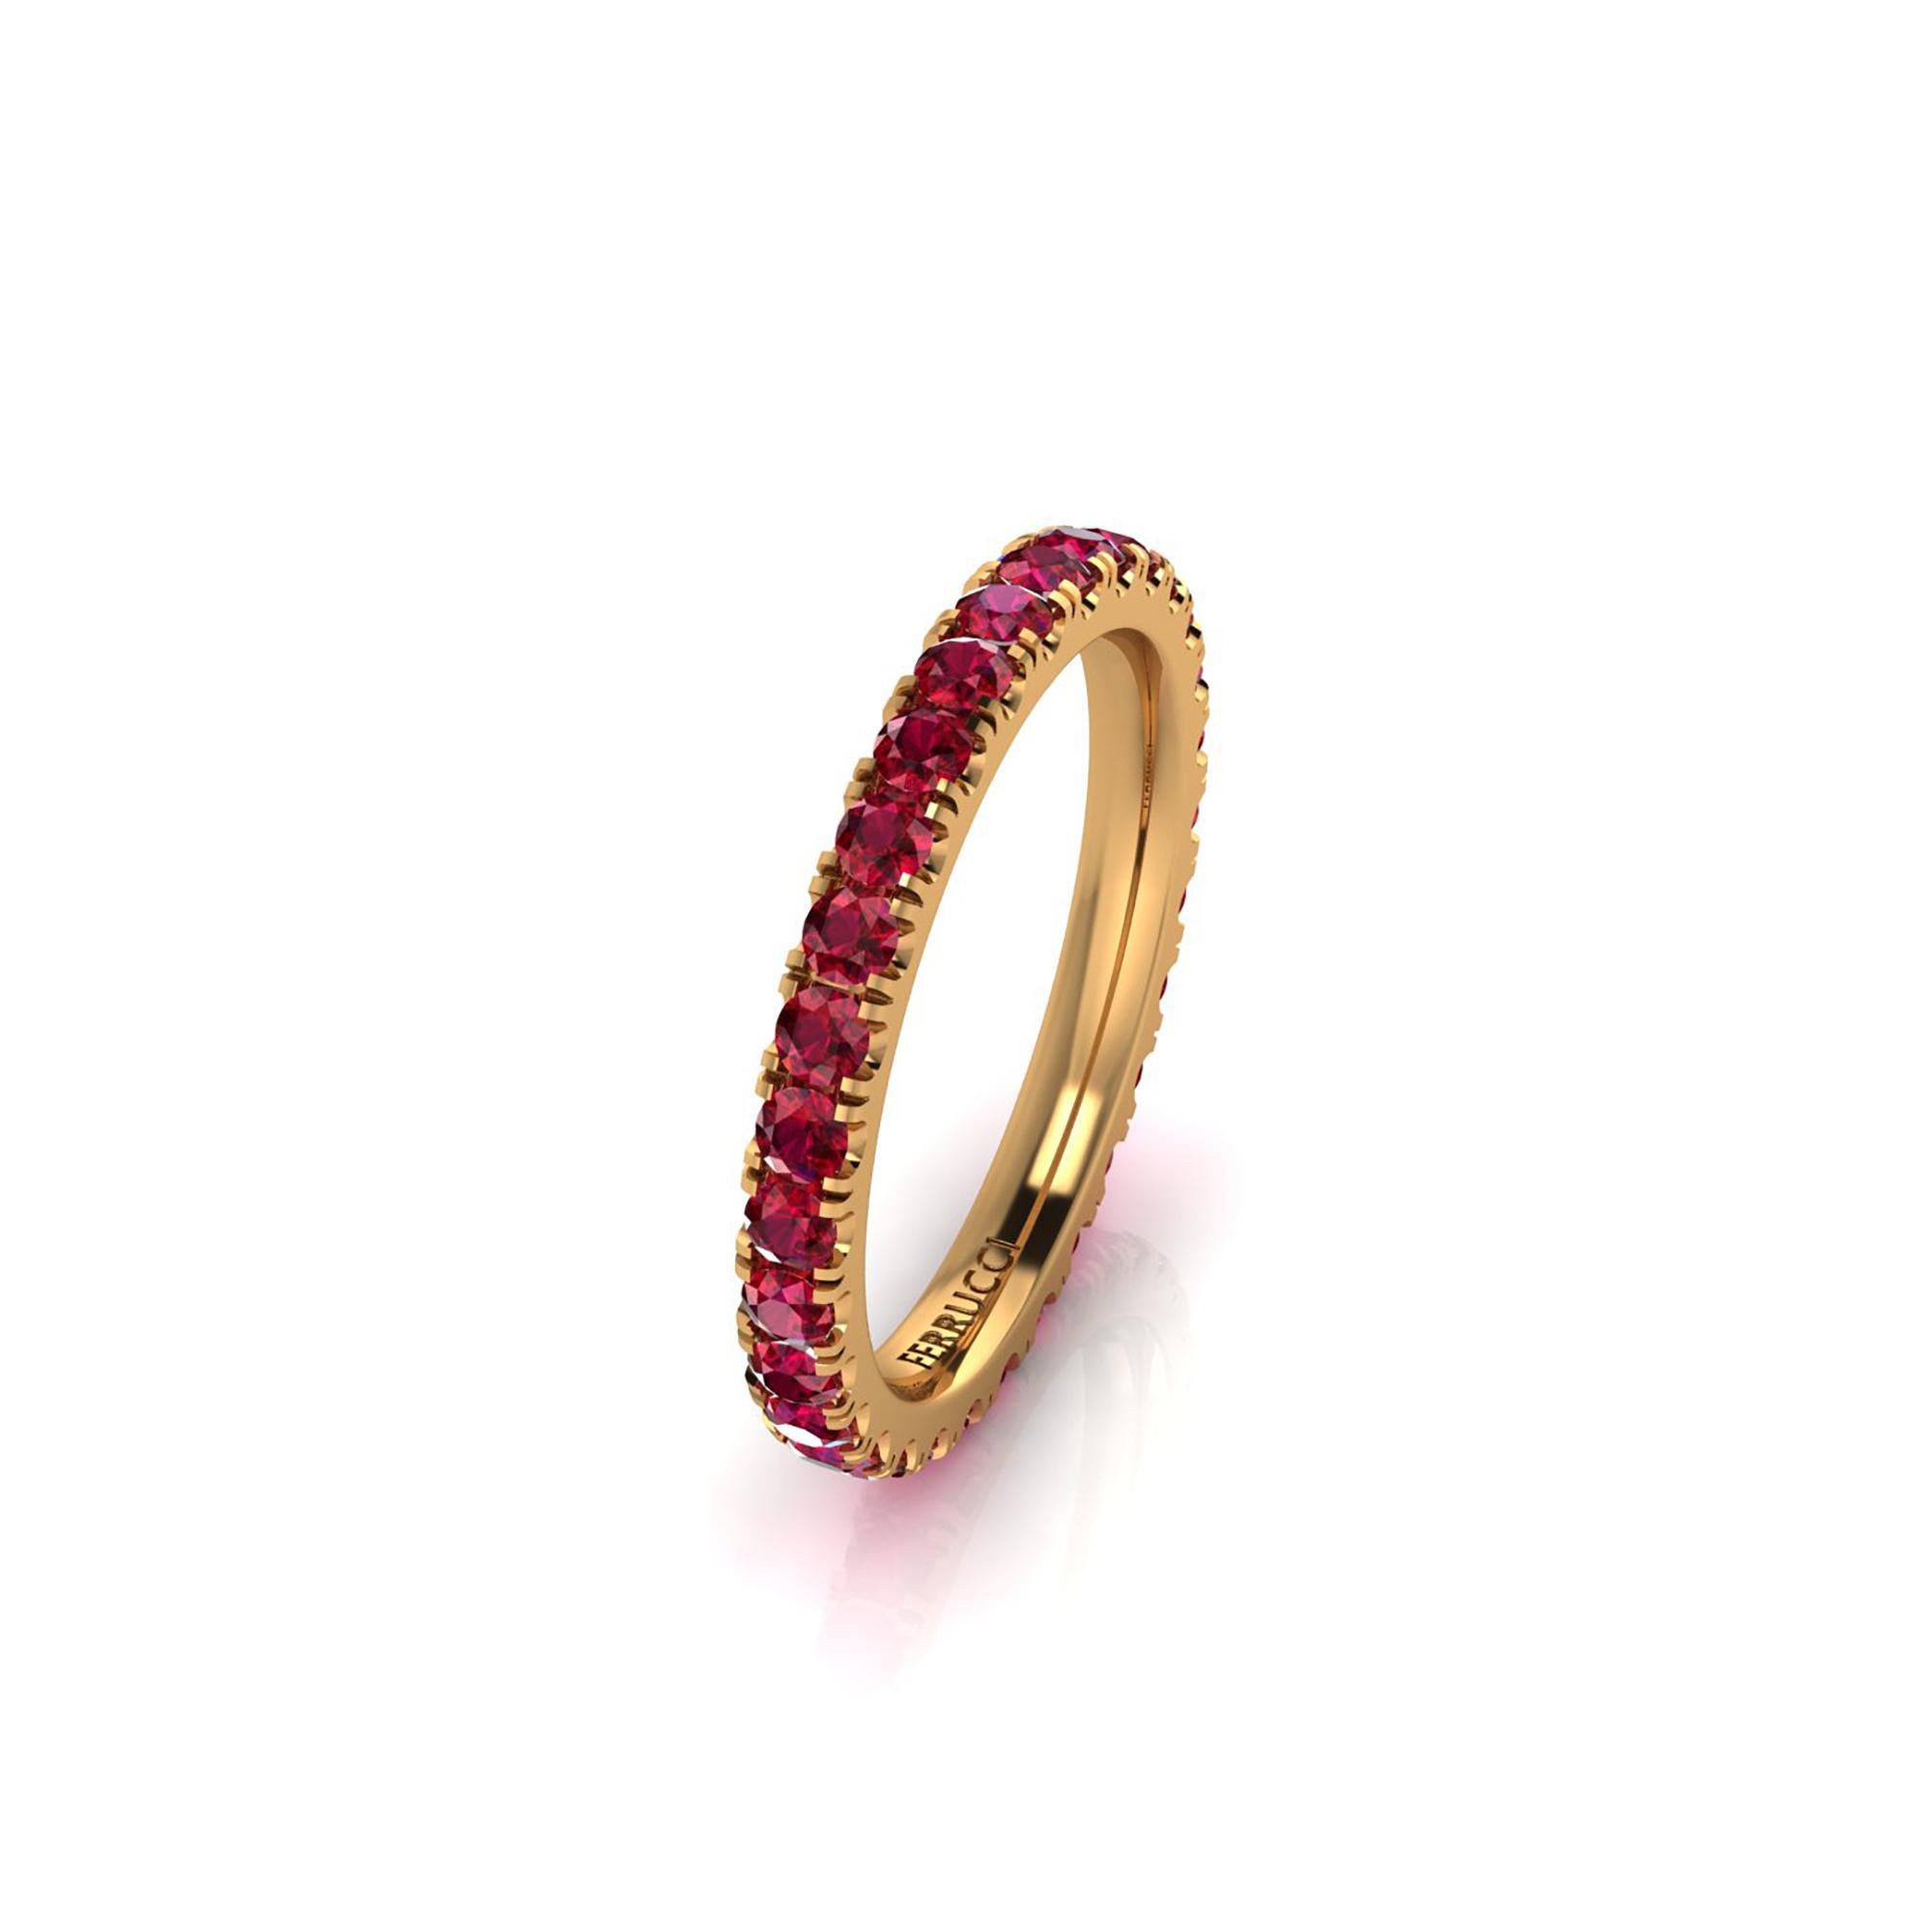 A classic beauty never ending, 1 carat of red rubies set to perfection in a hand crafted stackable 18k yellow gold eternity band, 2.3 mm wide, stackable collection, made in New York with the best Italian craftsmanship, size 6, complimentary sizing